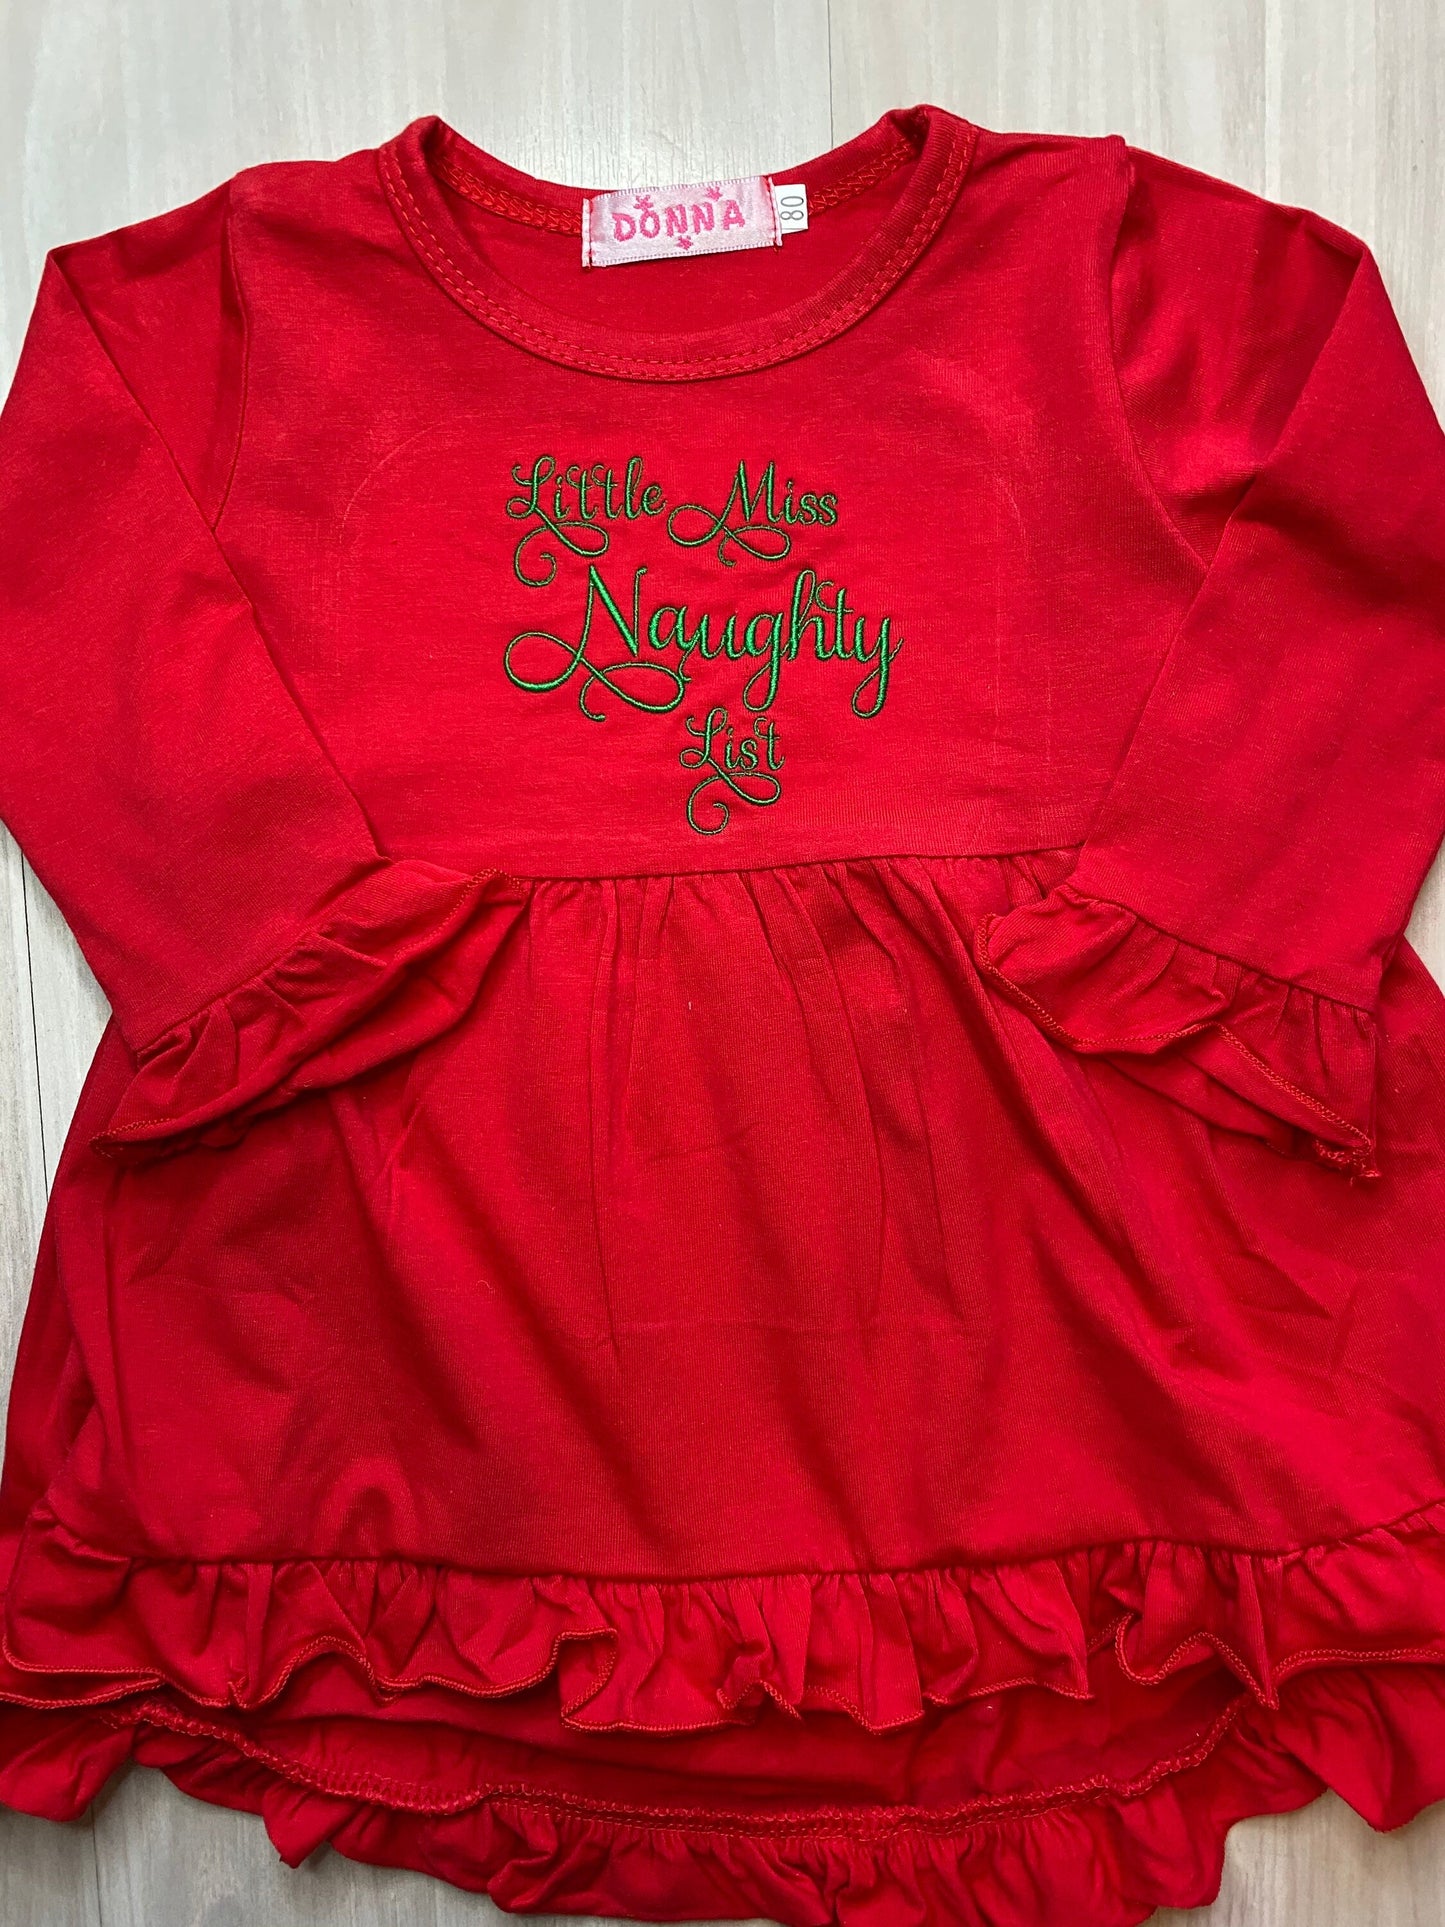 Christmas Outfit Naughty List girls hi-lo ruffle top pants headband flowy cute funny Santa Long sleeved lovely toddler baby infant dress